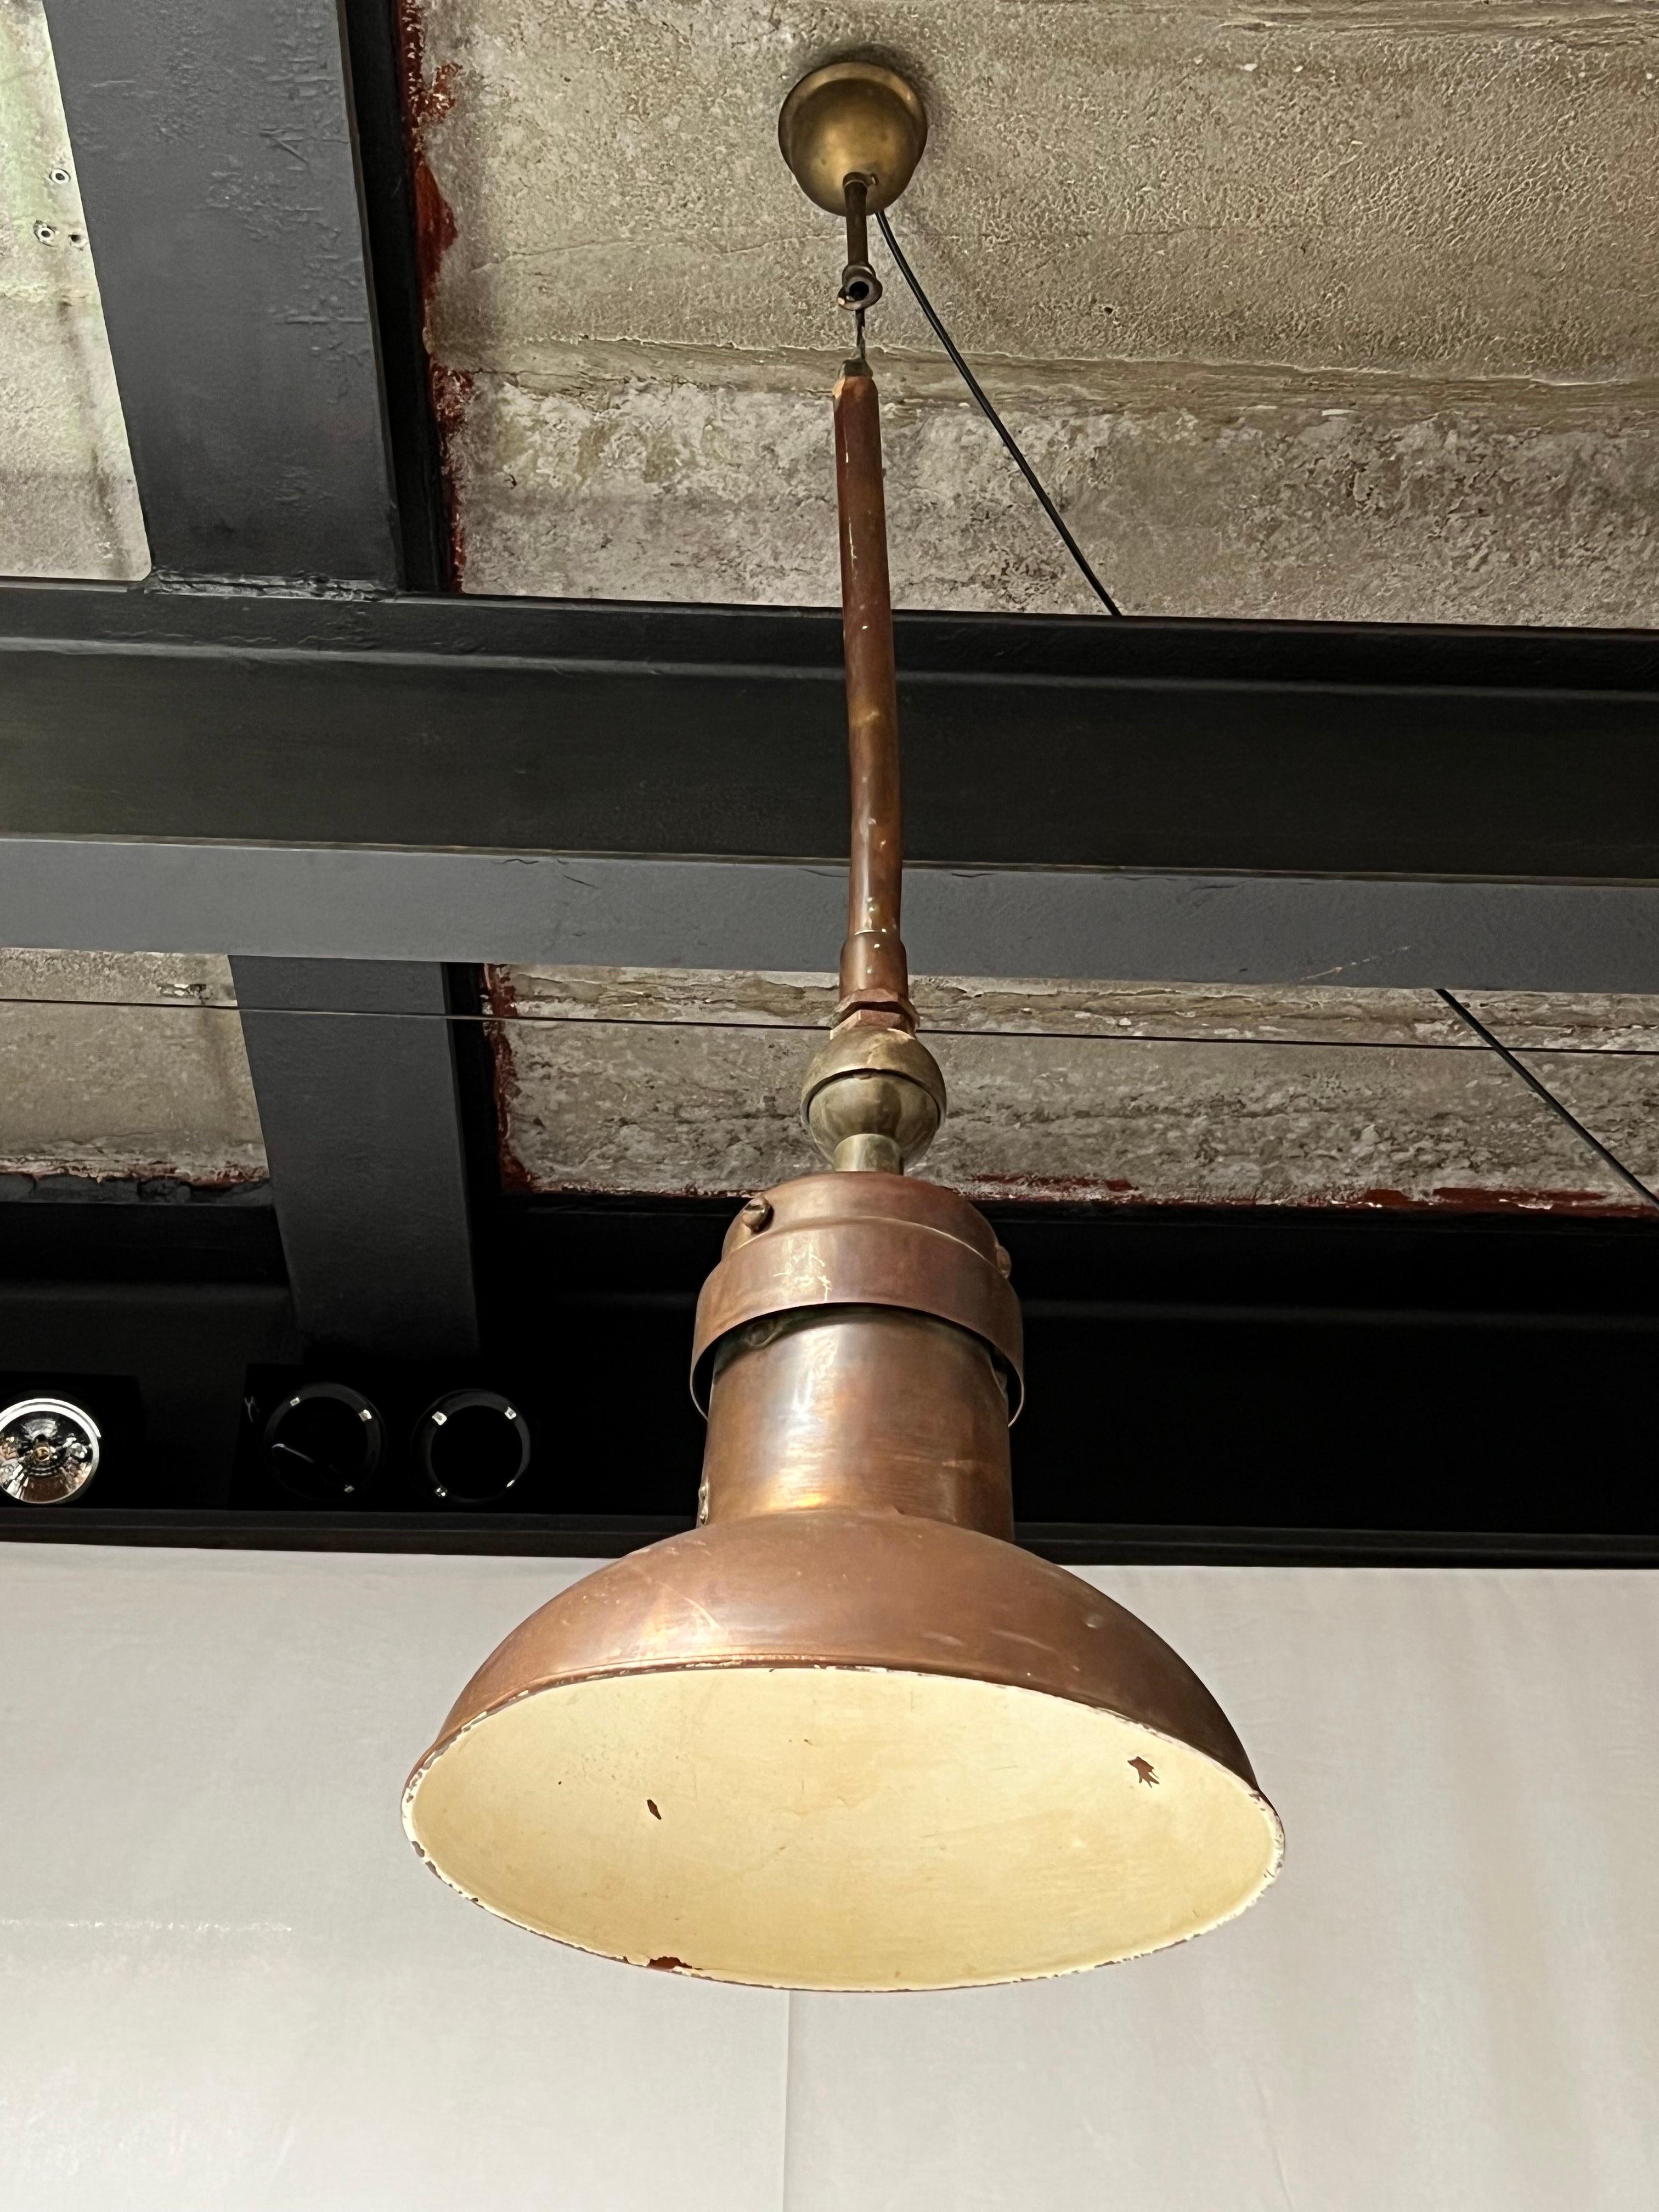 Delicate but strong copper and brass suspension lamp made in the 1850s in England. The lamp is well patinated and shows traces of time and use. Some minor pealing paint in the inside. The brass parts are also patinated. Fully functioning.